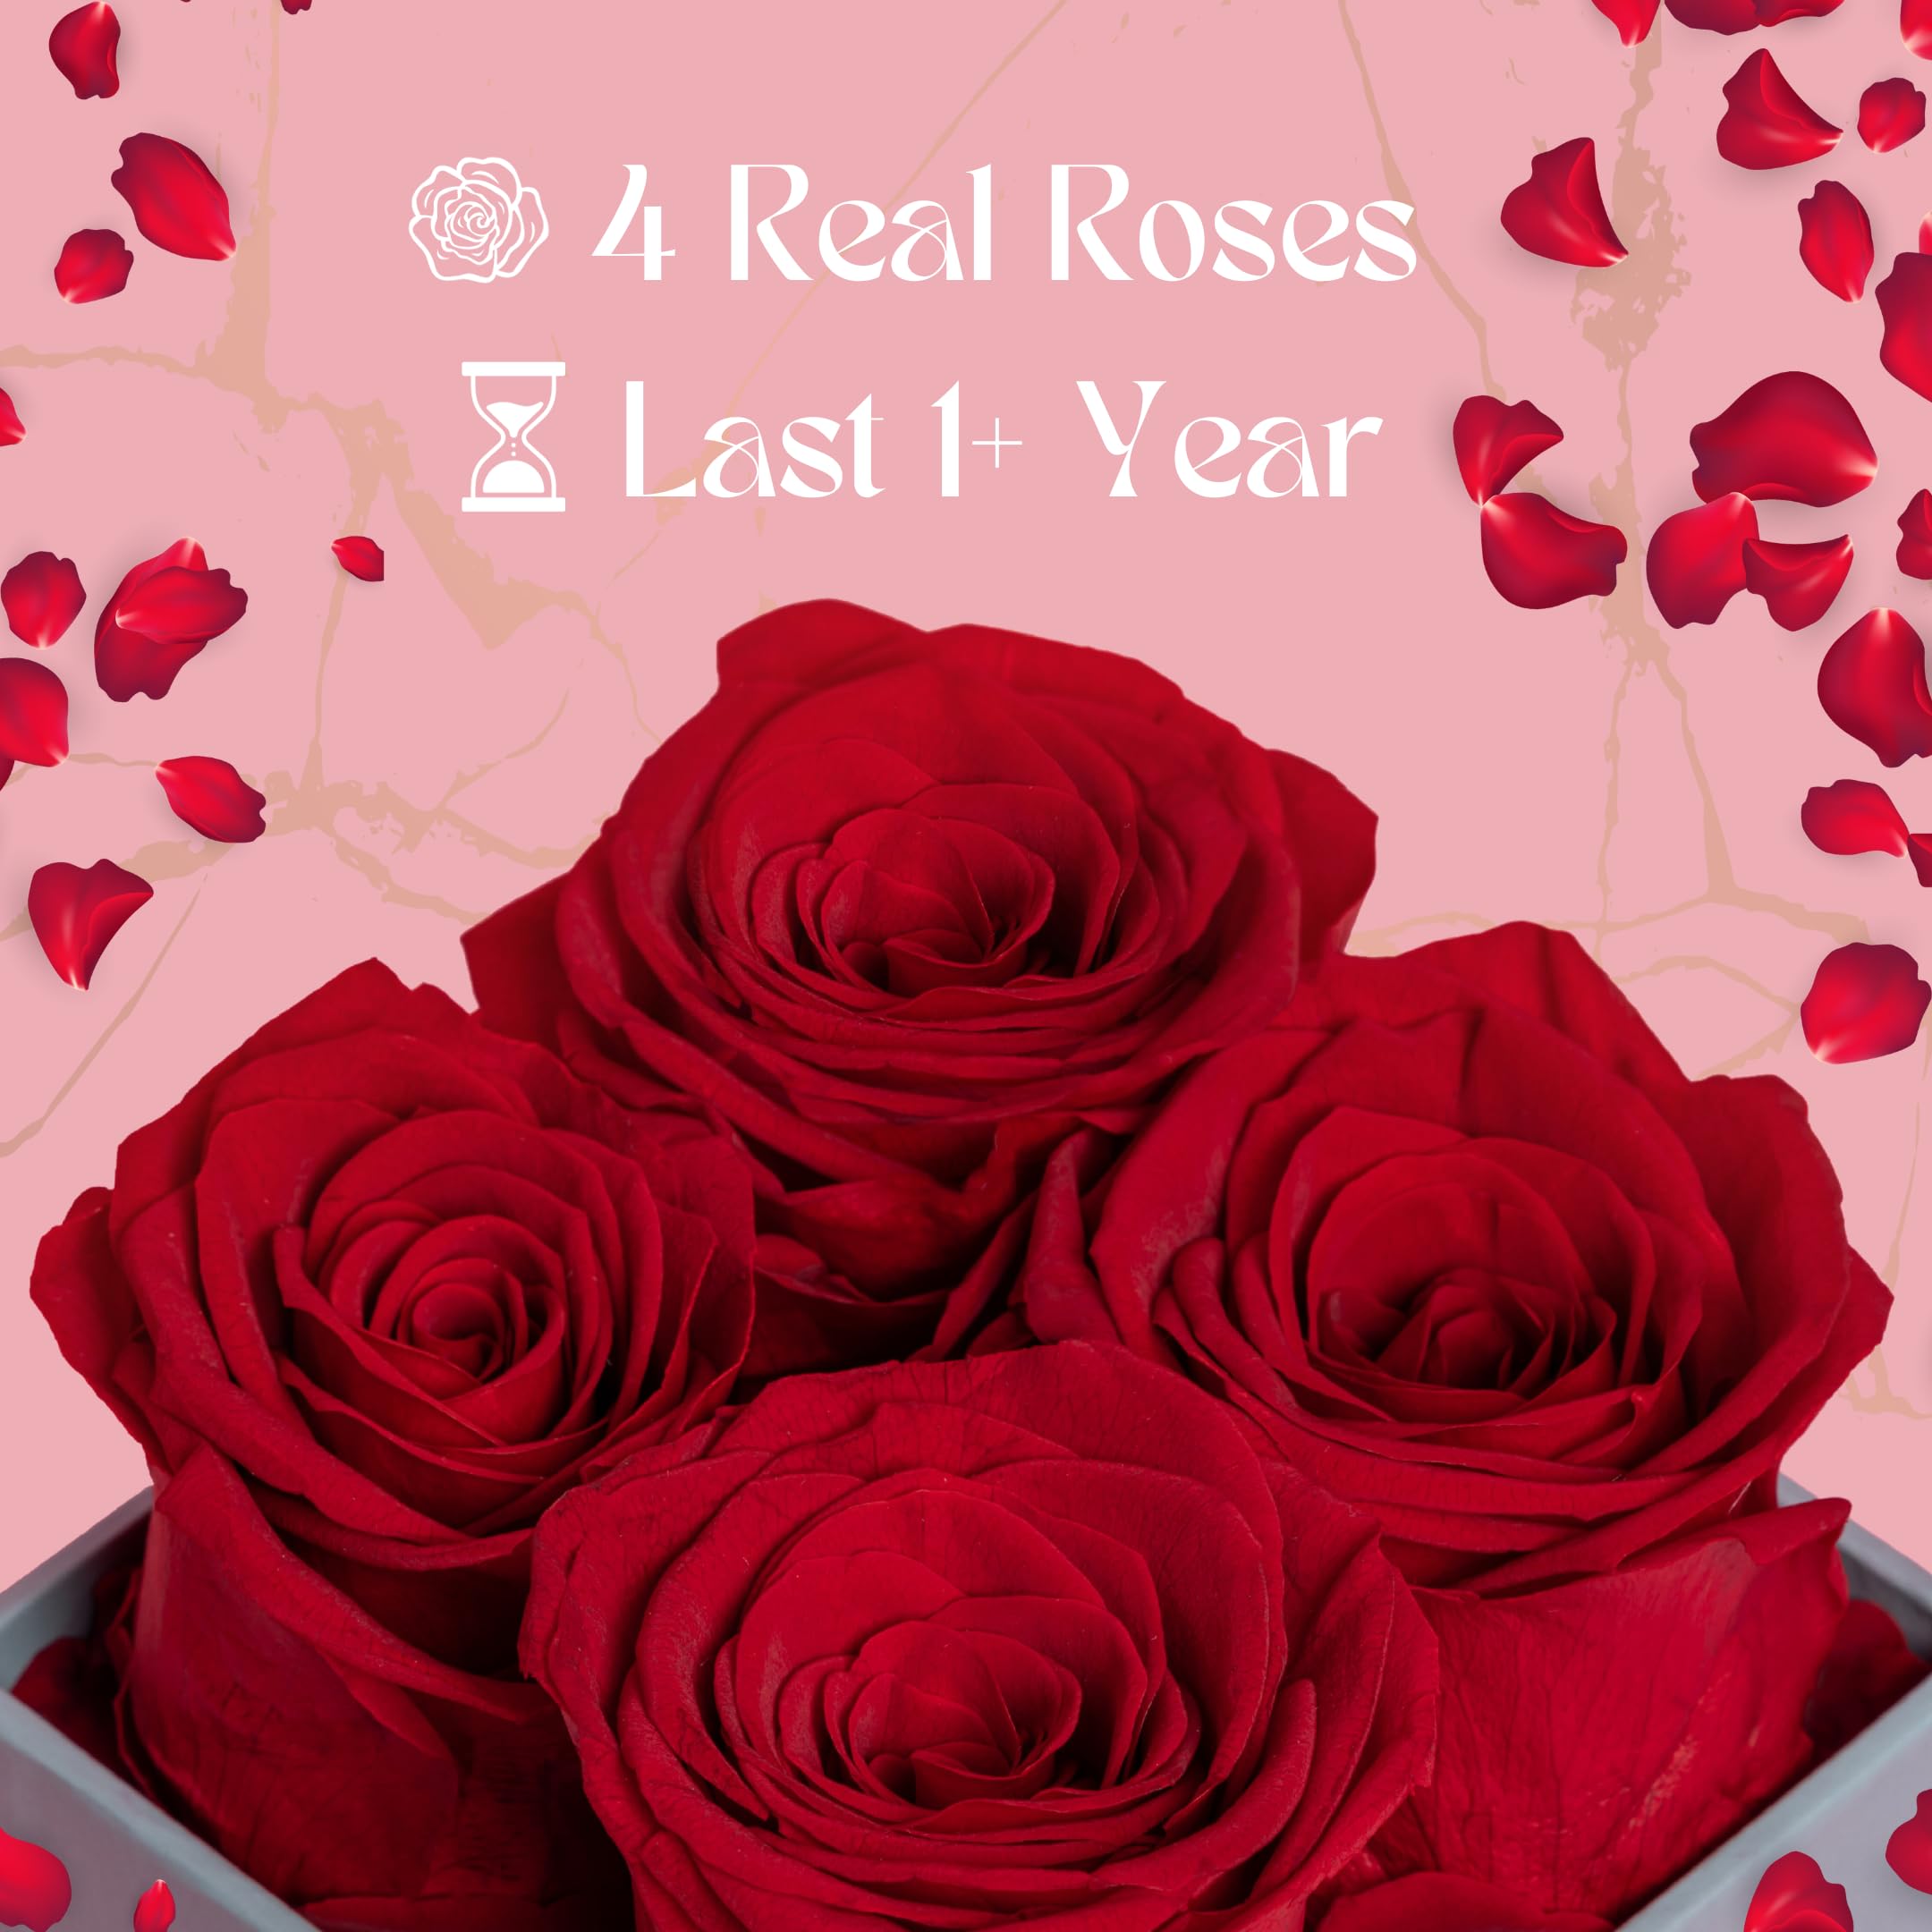 Wholesale Valentines Day Gift Forever Roses Real Natural Eternal Everlasting Roses Flower Preserved Flower Rose Square In Box